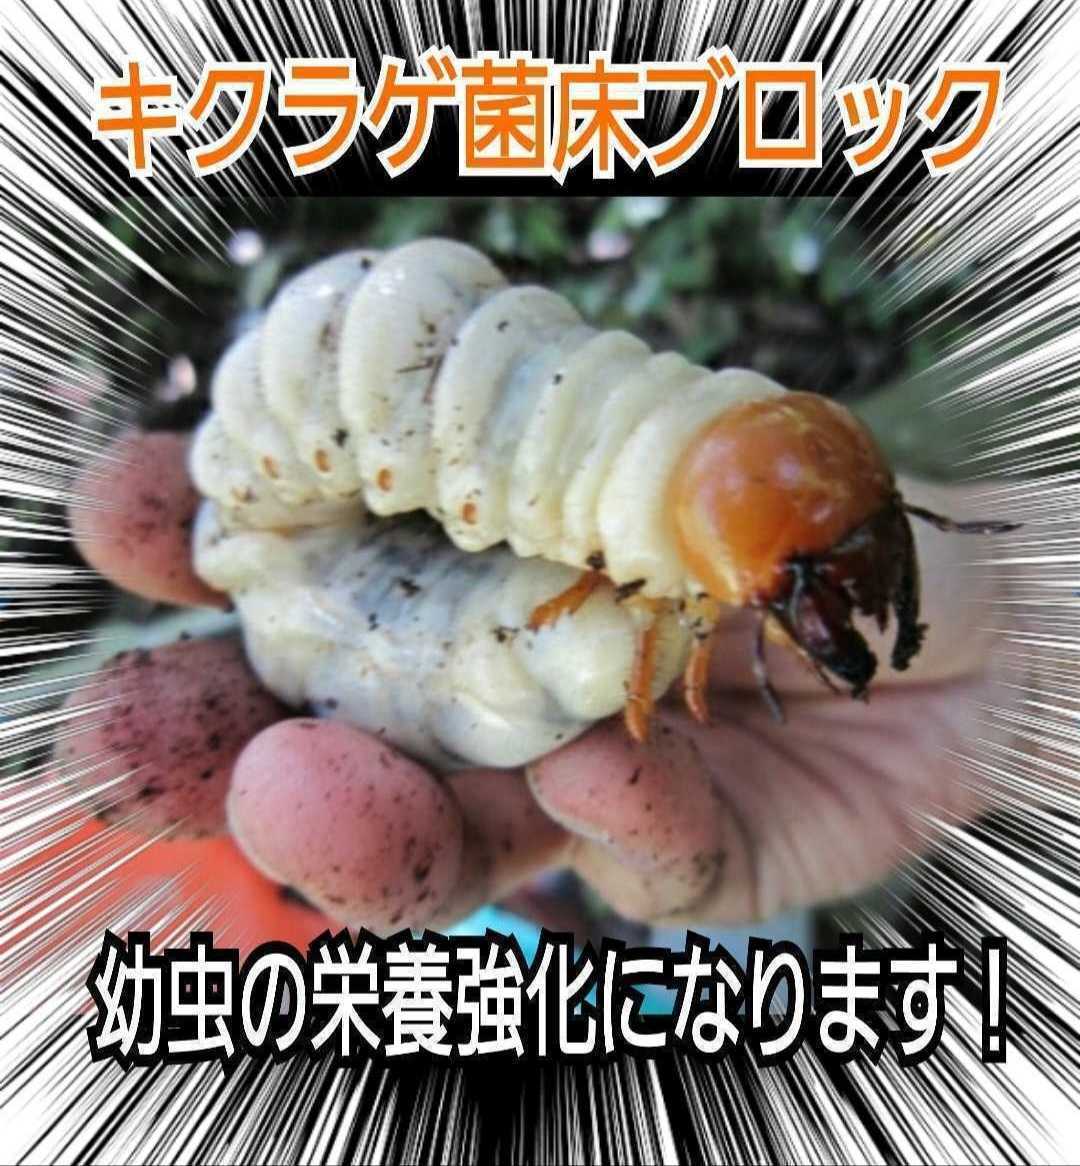  rhinoceros beetle larva. nutrition strengthen .!ki jellyfish . floor block [15 piece ] mat . embed only .mo Limo li meal ..! stag beetle. production egg material. instead of .OK